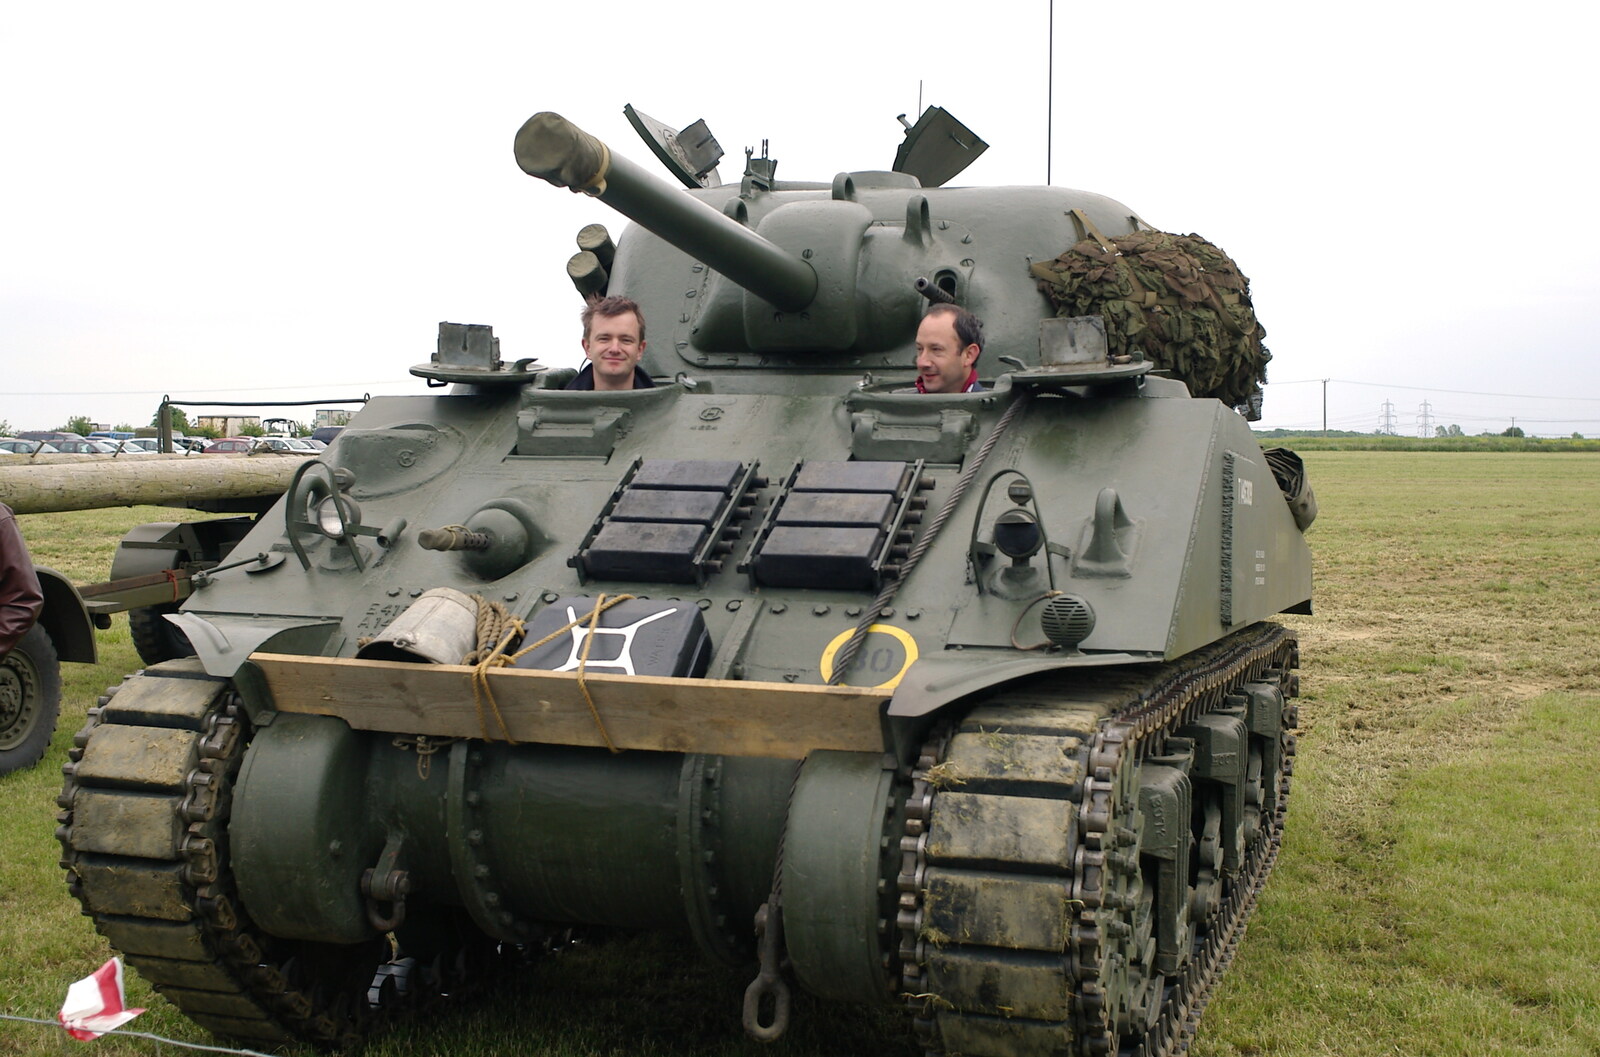 Nosher and DH in the Sherman tank from An Airfield Open Day, Debach, Suffolk - 12th June 2005